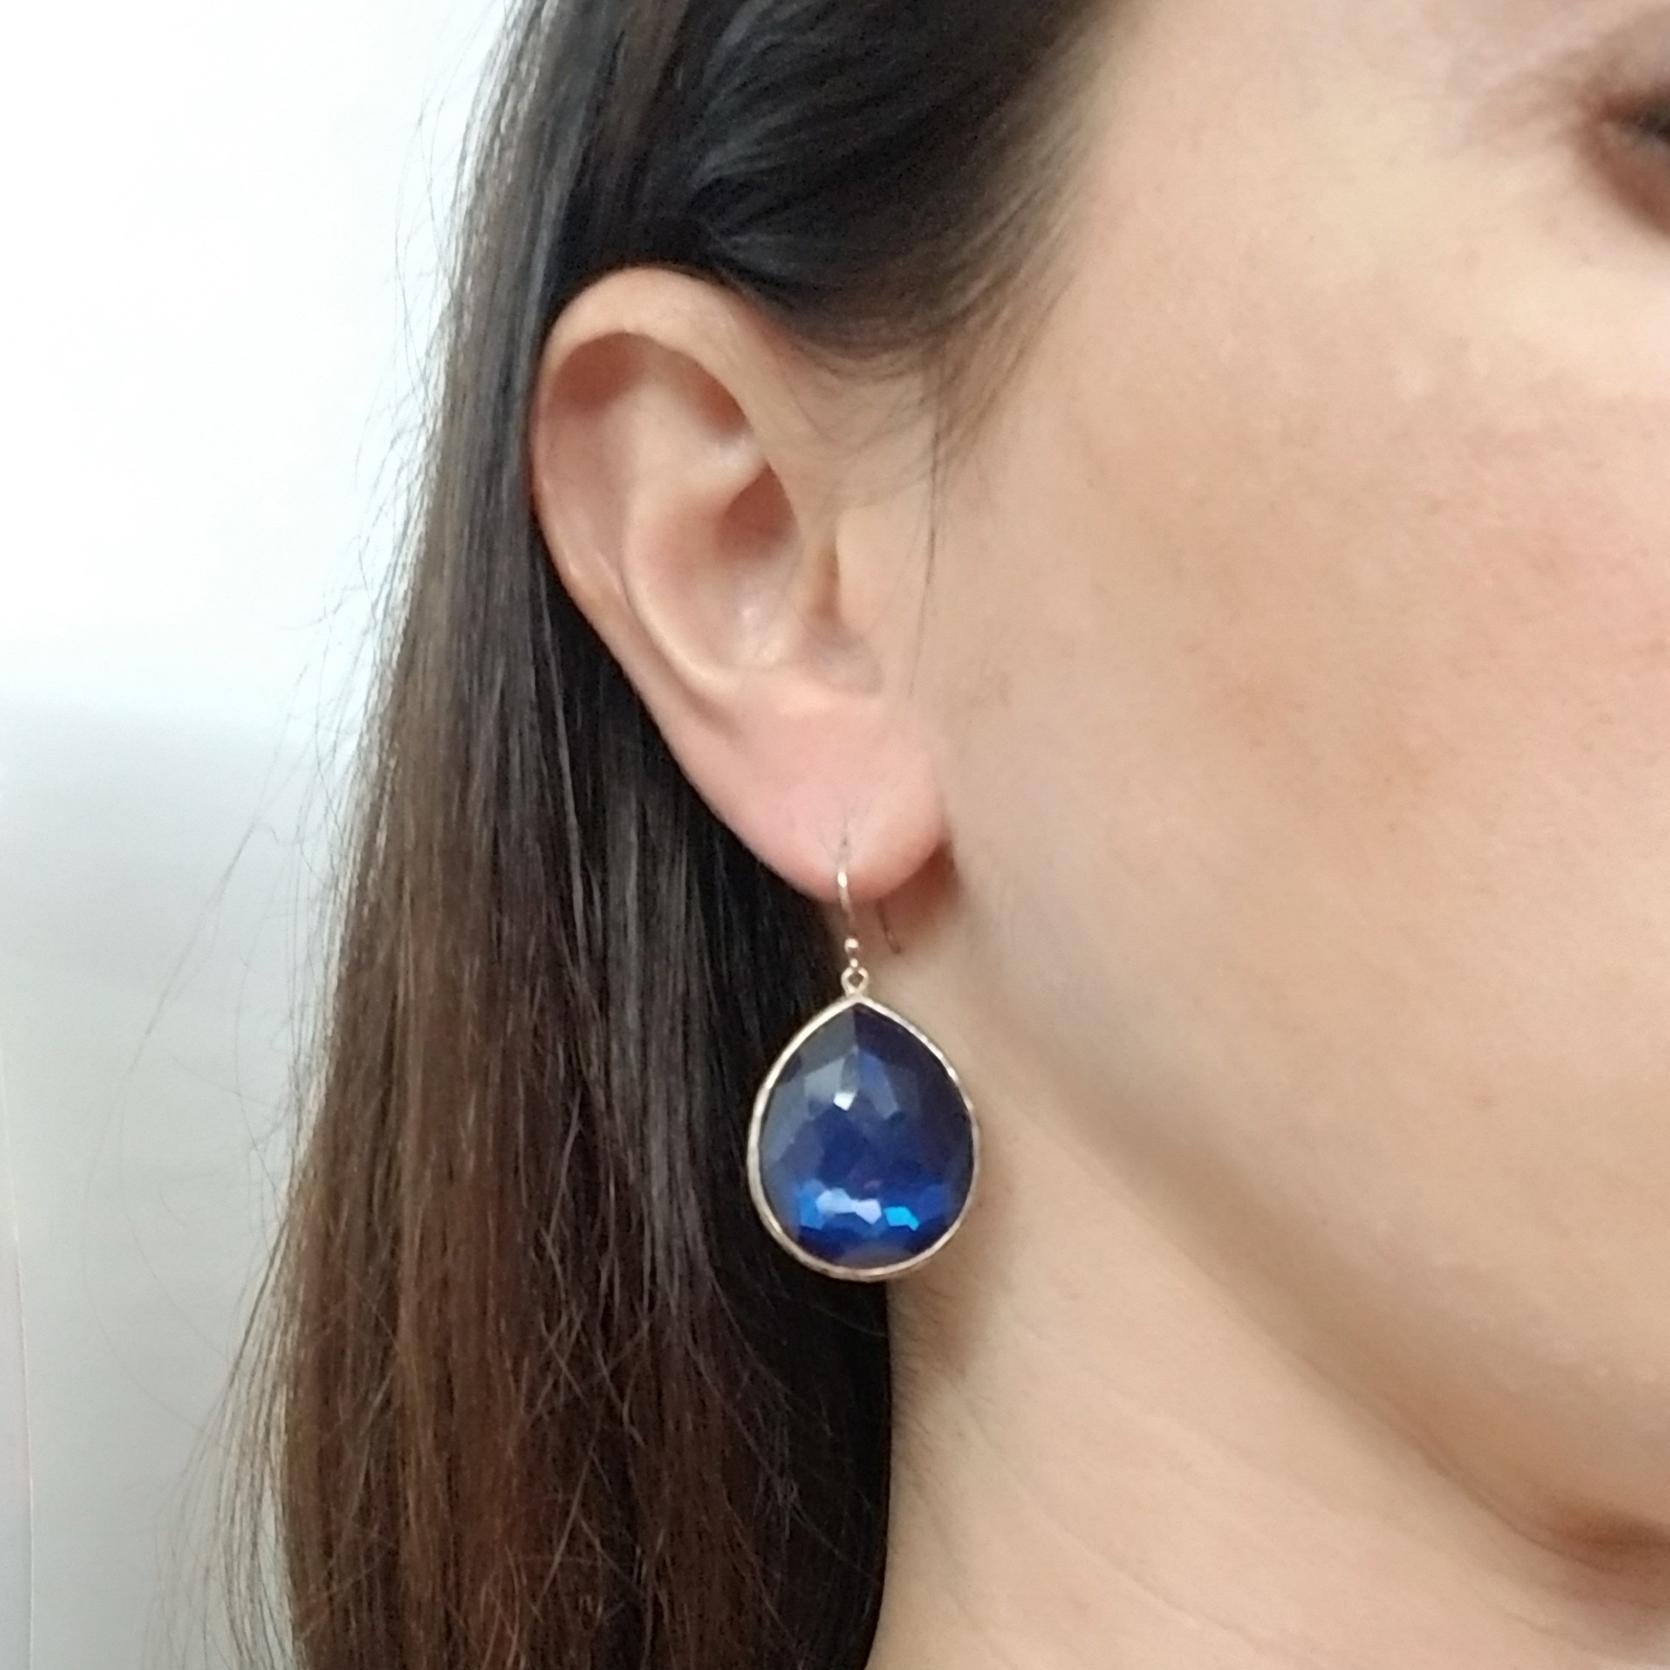 Large sterling silver drop earrings crafted by Italian designer Ippolita. They feature pear-cut hematite backs and faceted quartz fronts with a dark blue tone. The attachment is a shepherd's hook. $550 MSRP. Stone portion of earrings measure